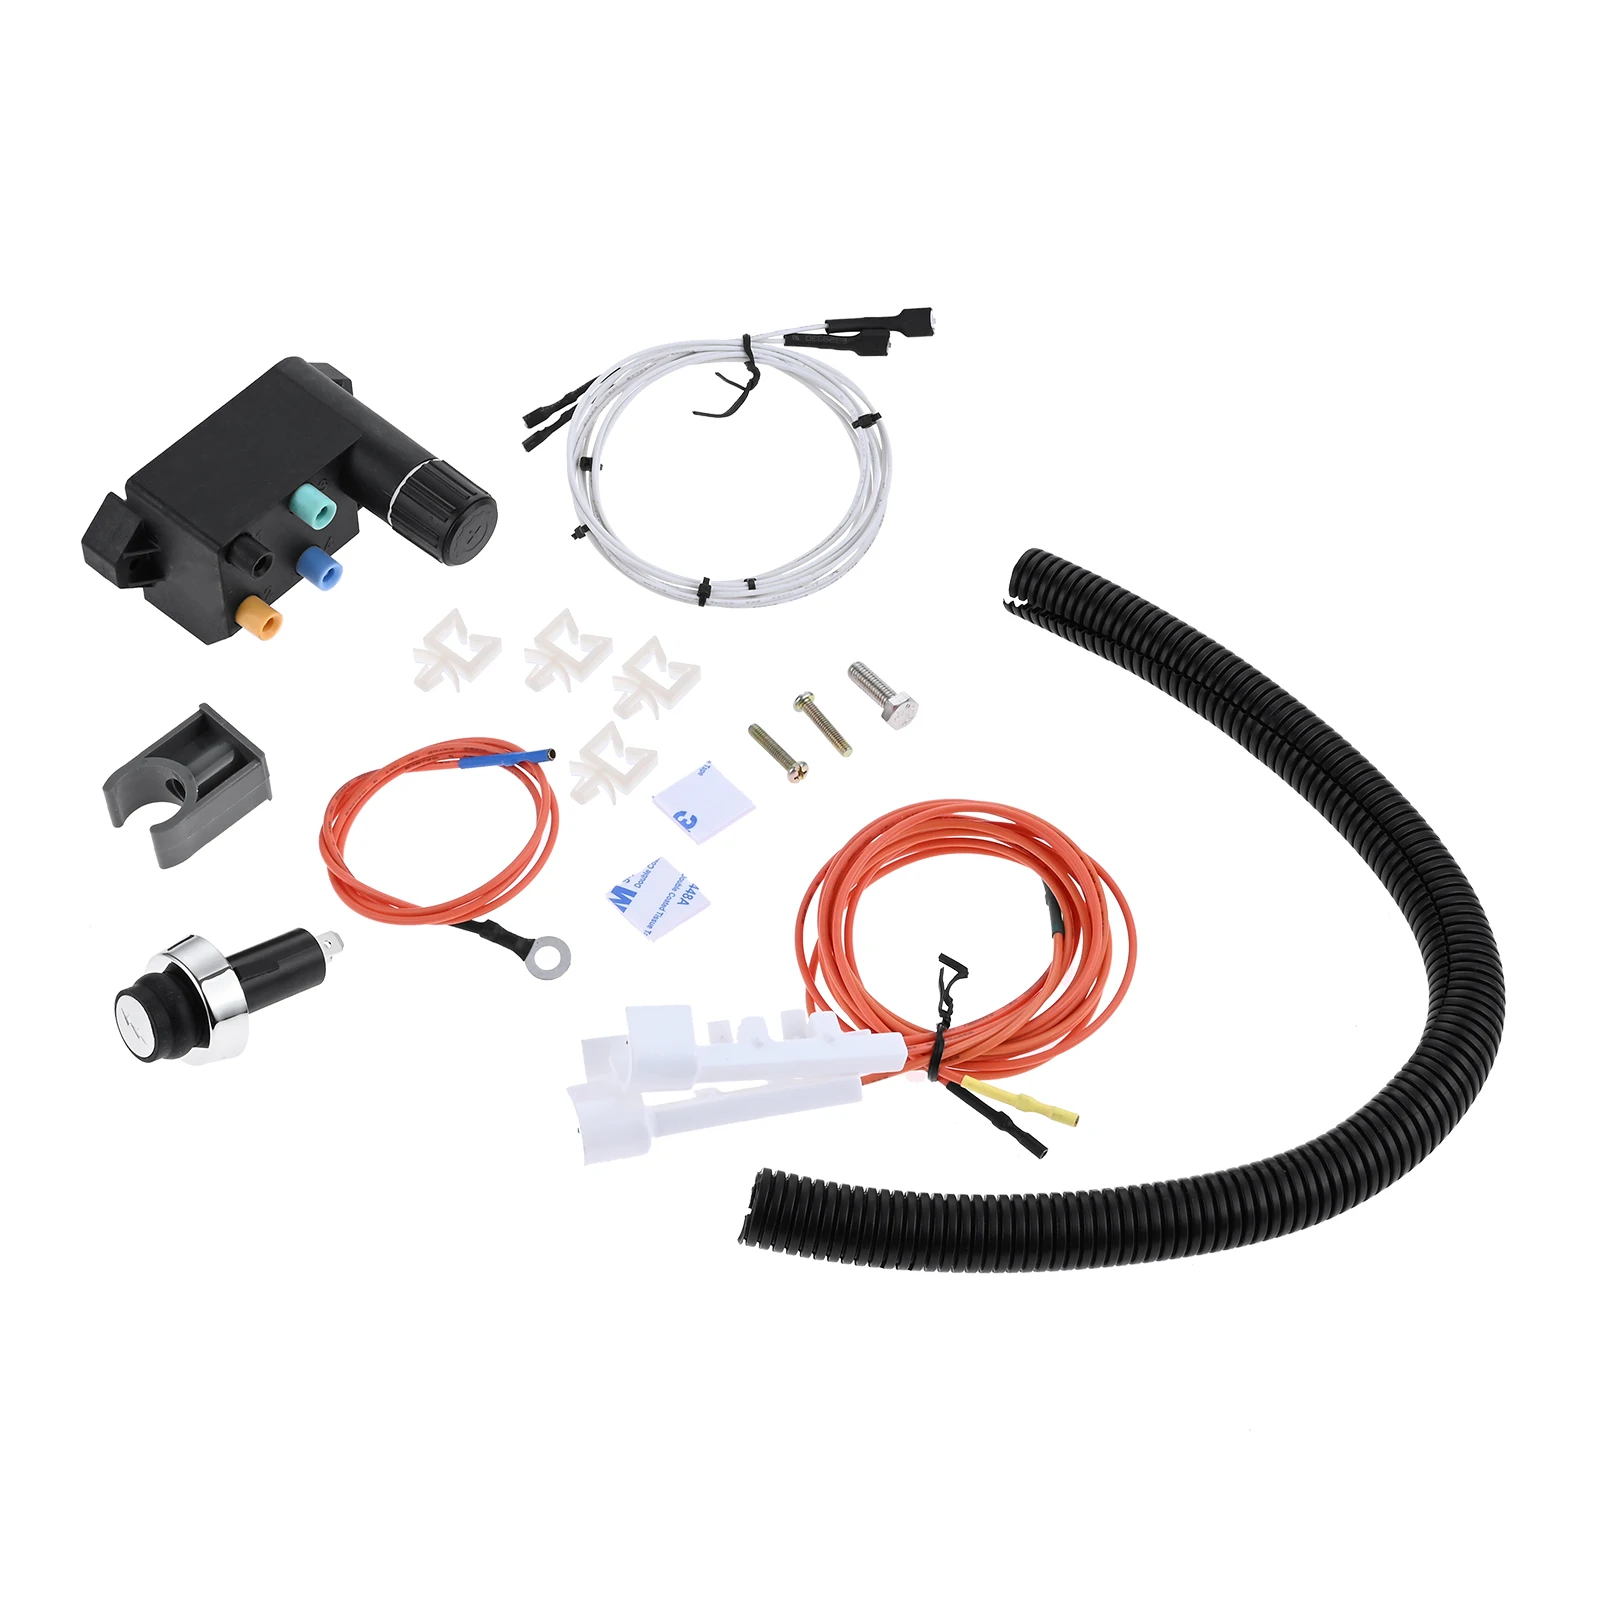 

66354 Grill Igniter Kit for Weber Genesis II 310/315 Gas Grills - E310 S310 SE310 E315,4-Outlet Electronic Ignition Replacement